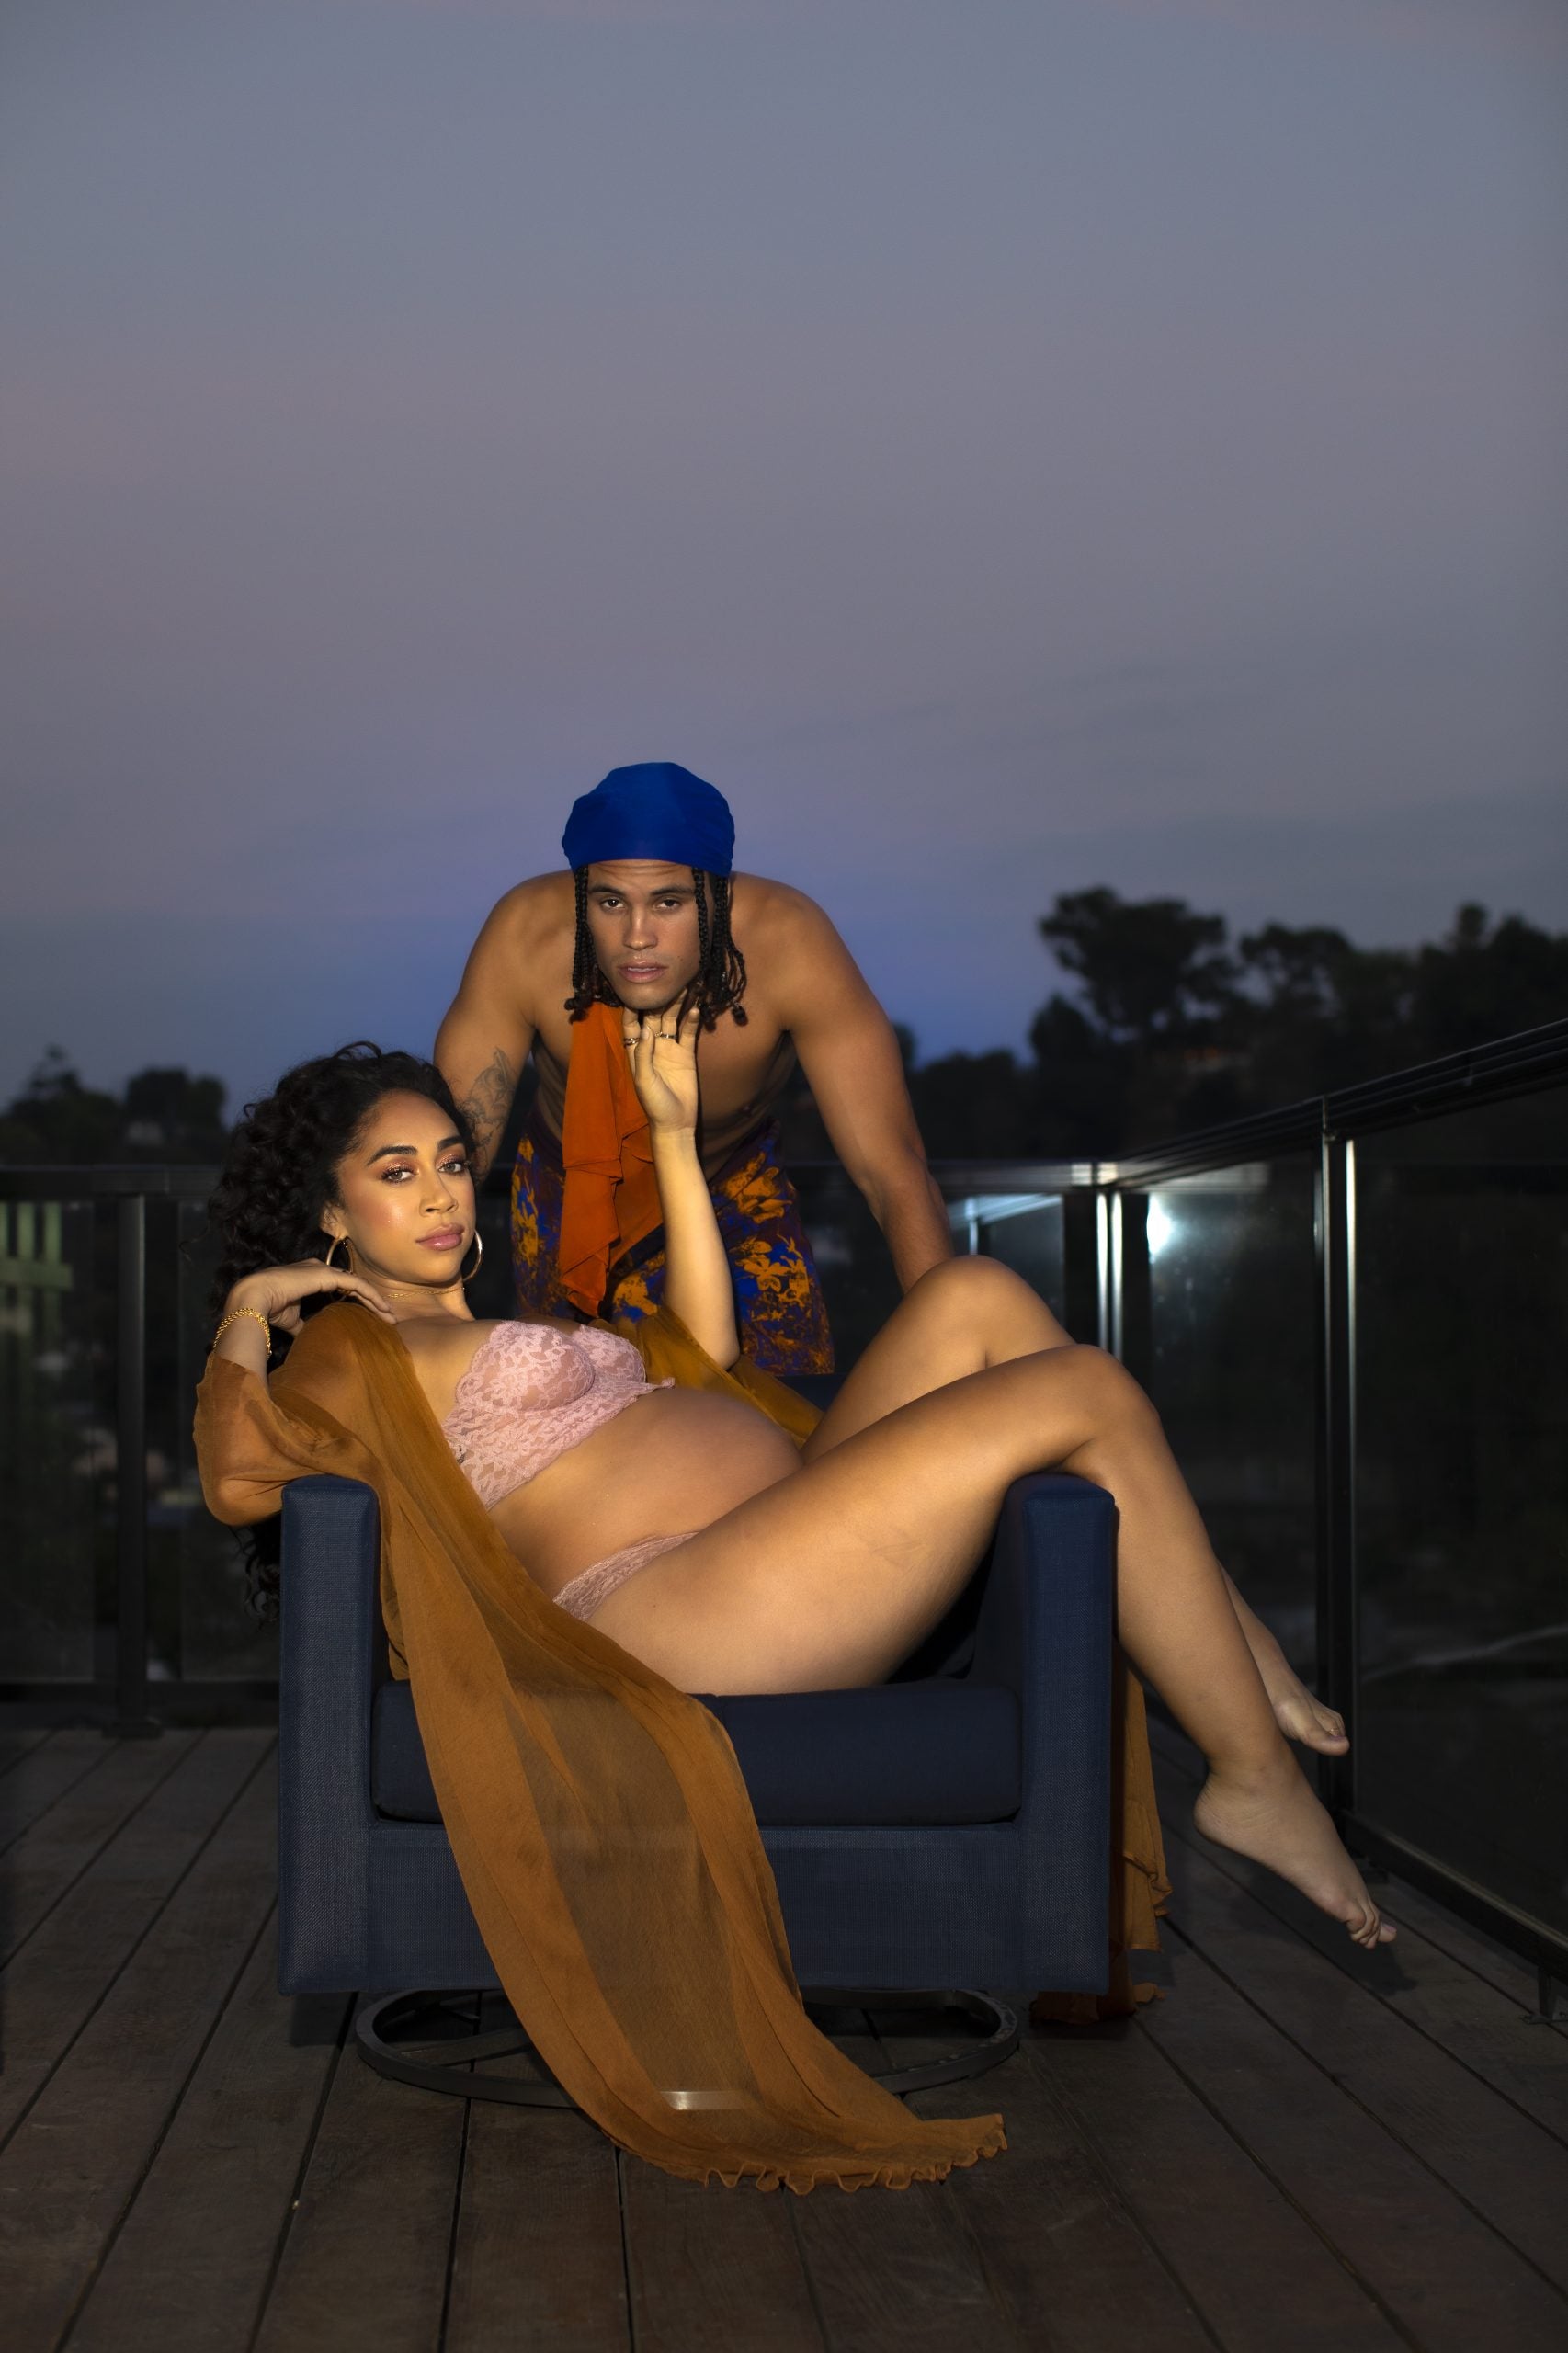 Sexologist Shan Boodram’s Maternity Shoot Is An Ode To Pregnancy As A Superpower